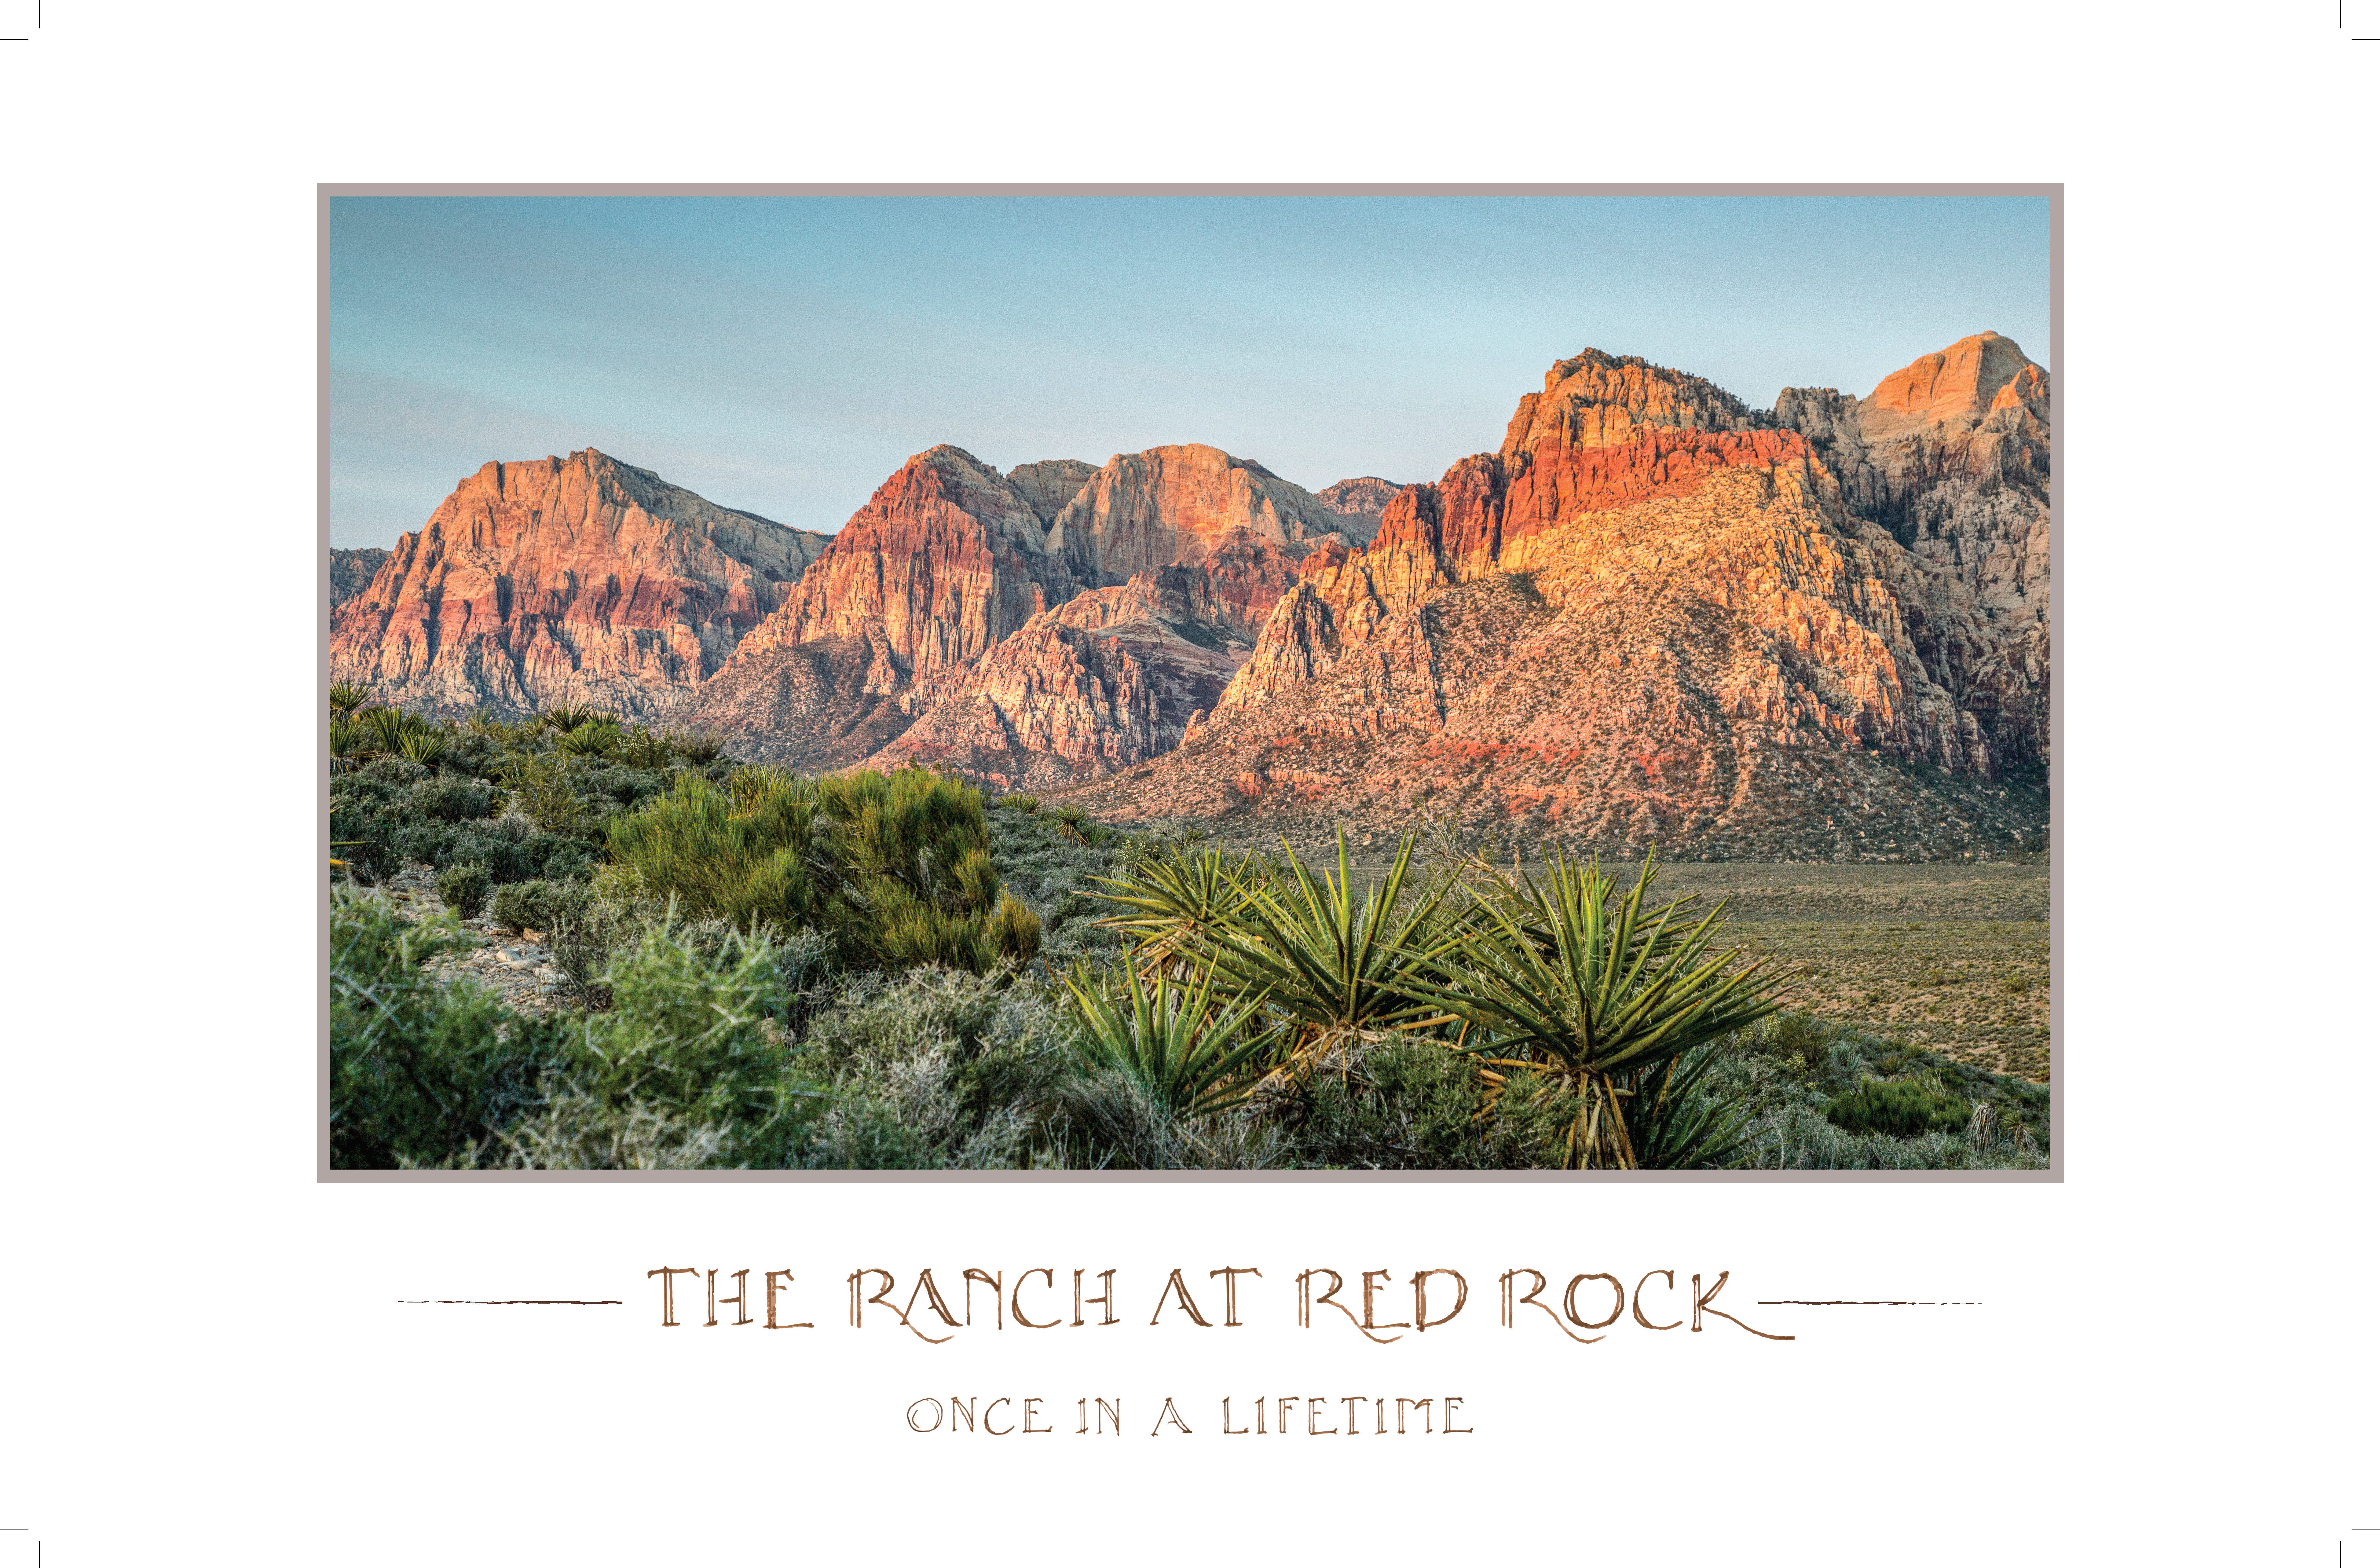 Synergy Sotheby S International Realty Announces The Ranch At Red Rock A New Luxury Recreational Residential Development In Las Vegas Business Wire